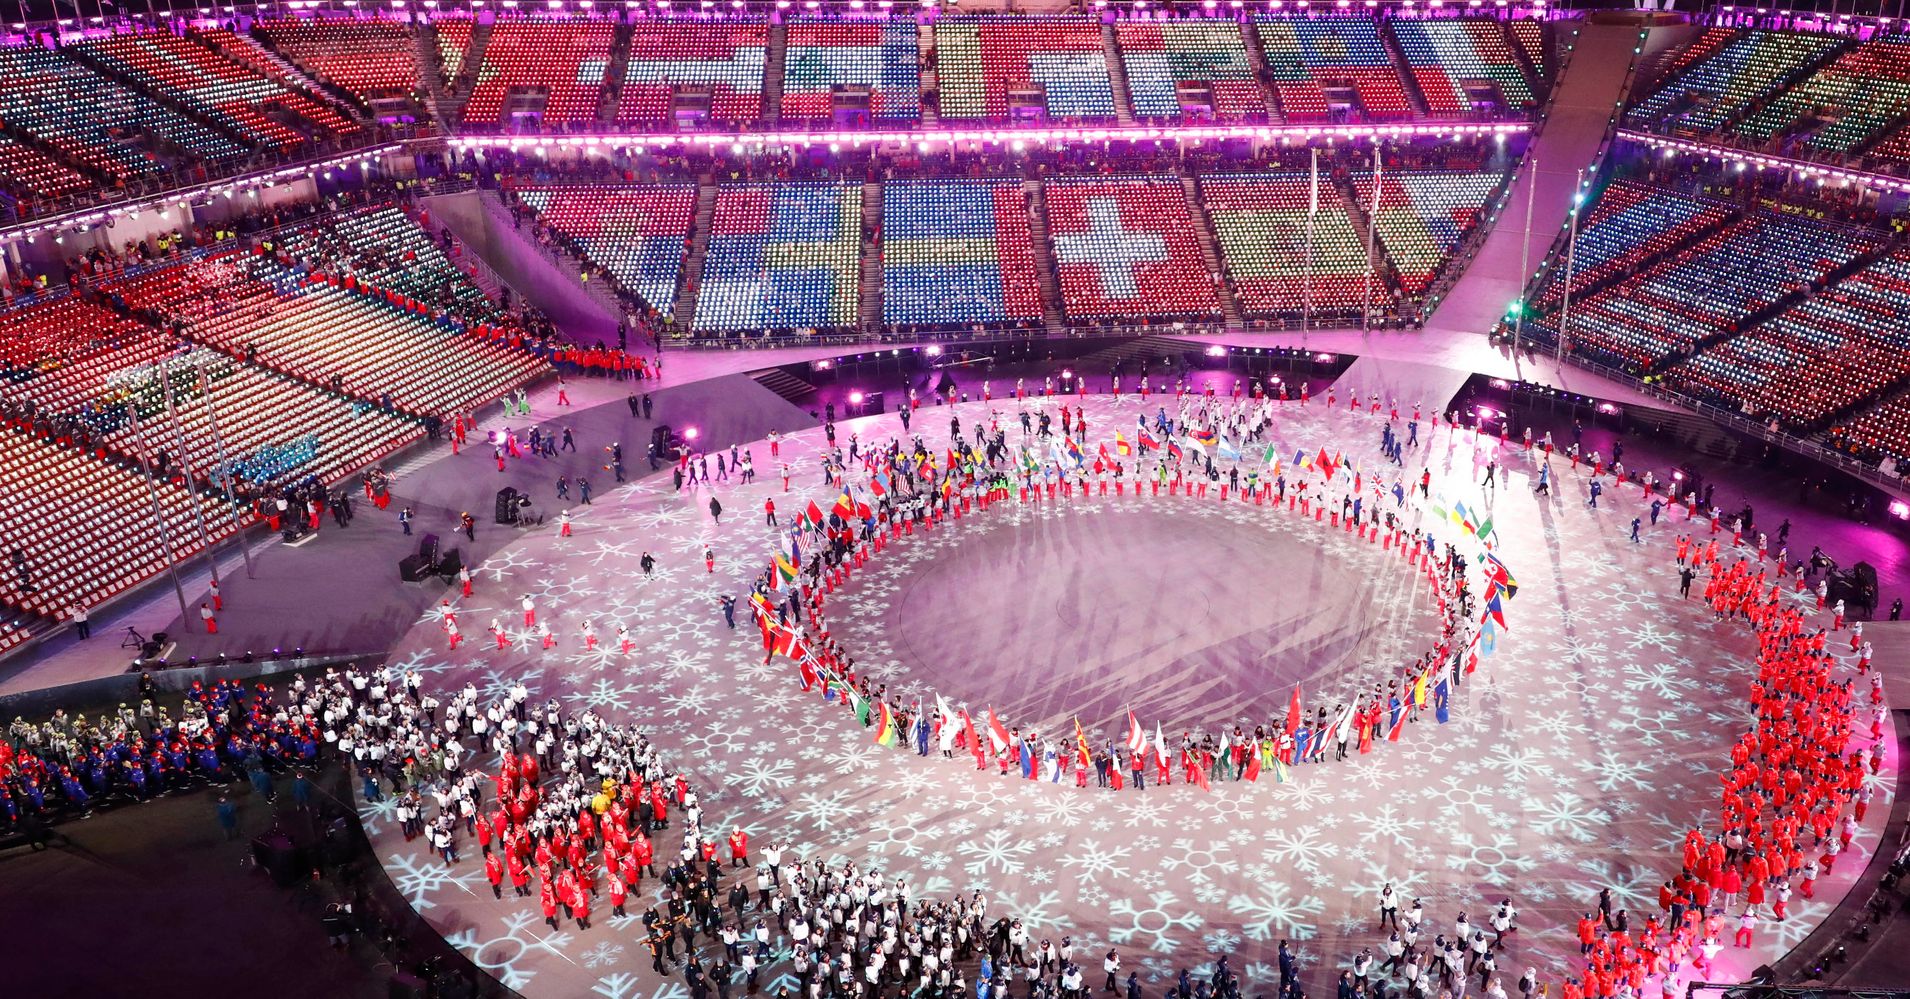 Stunning Photos Capture The 2018 Olympics' Closing Ceremony In All Its